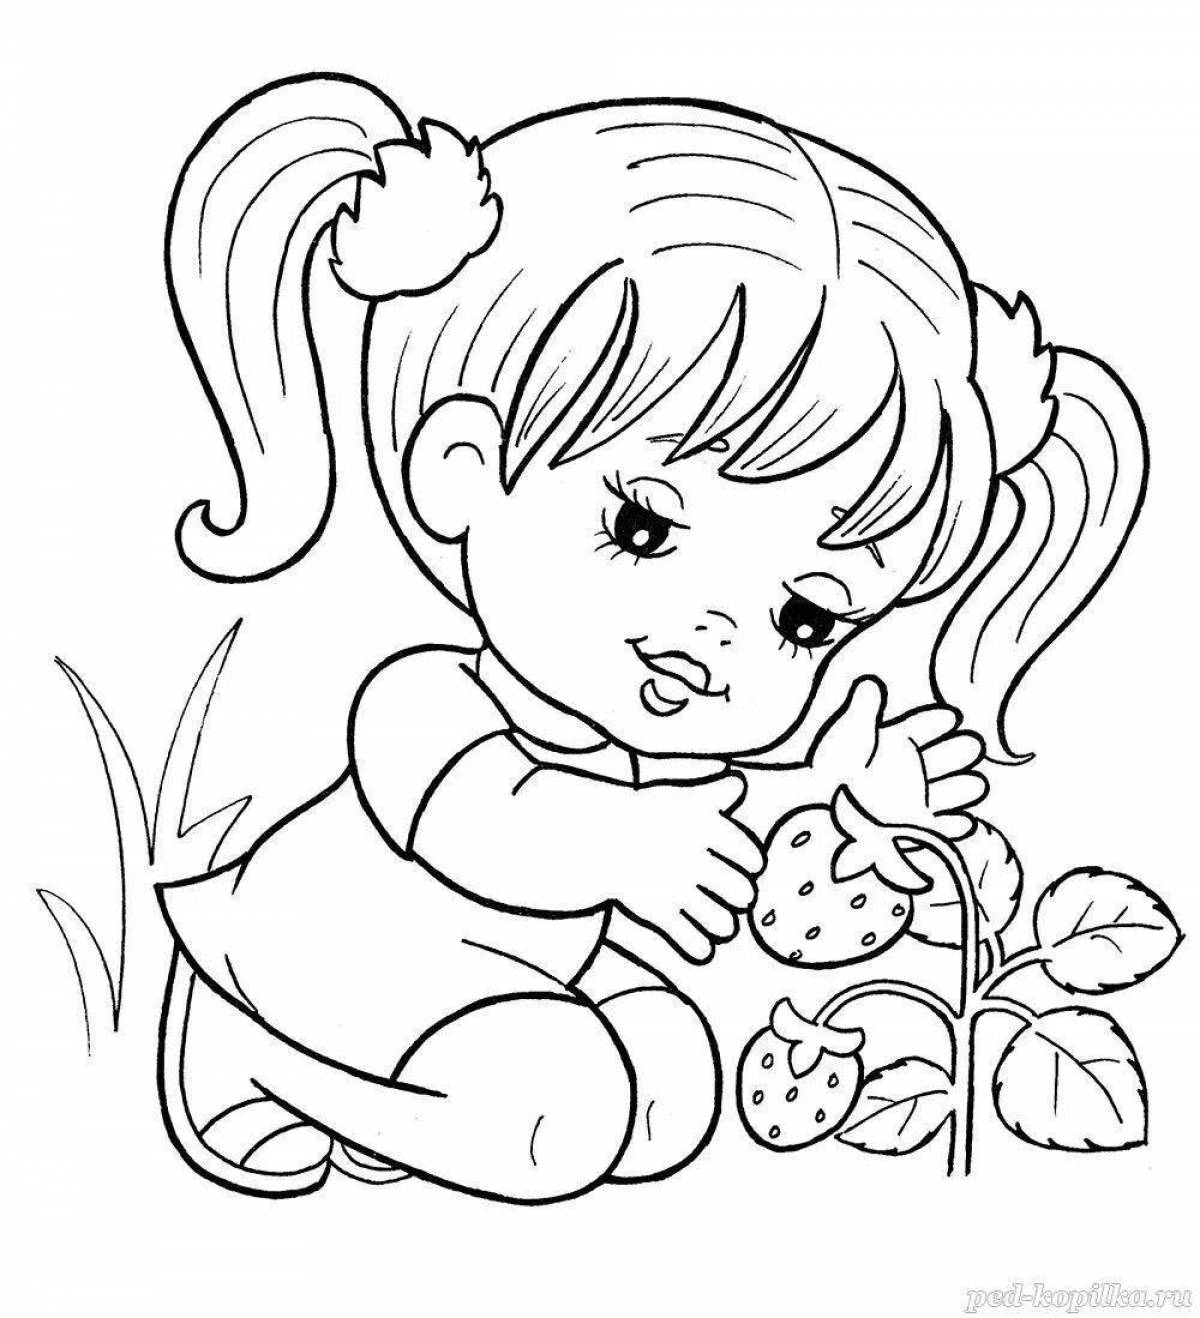 Colour-enchanted coloring pages for children